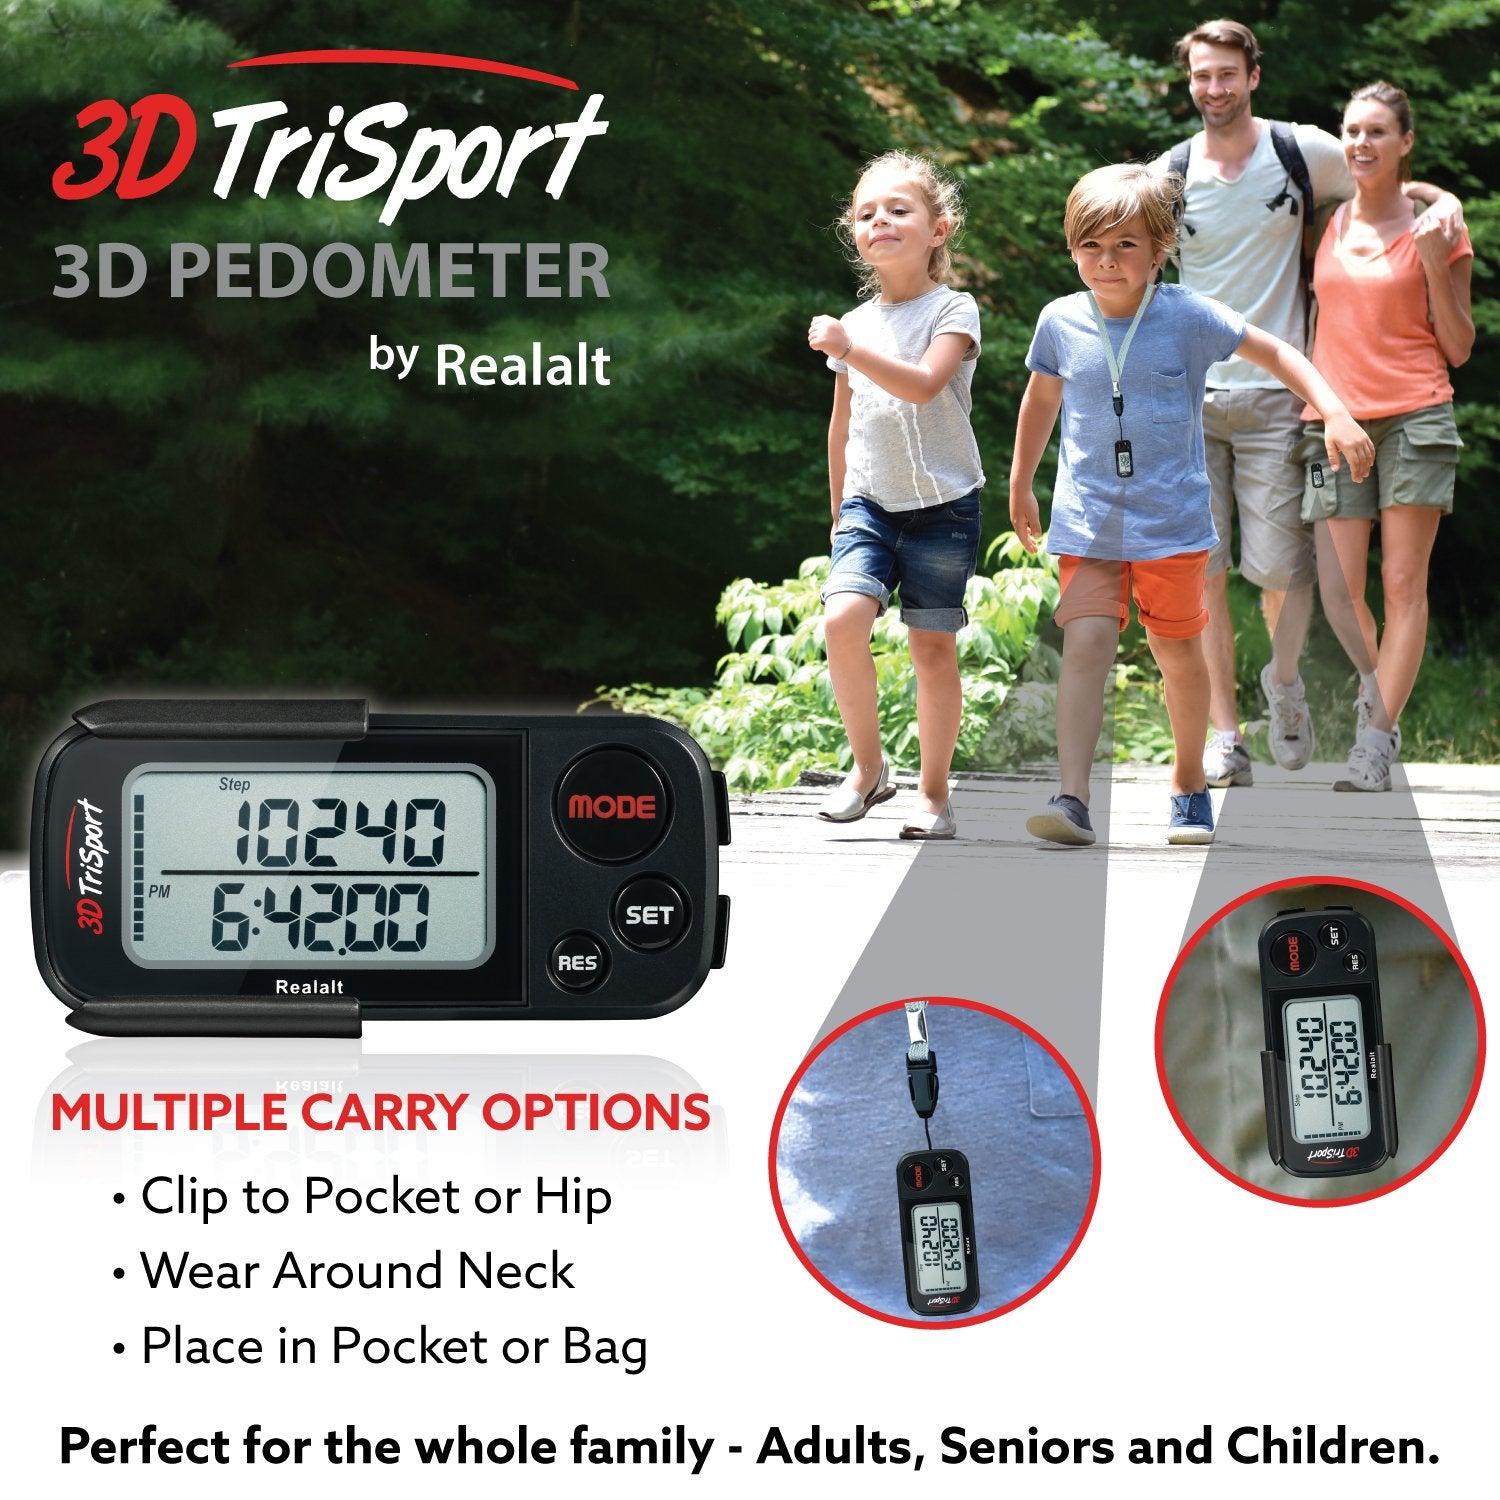 Realalt 3DTriSport 3D Pedometer, Accurate Step Counter with Clip and Strap